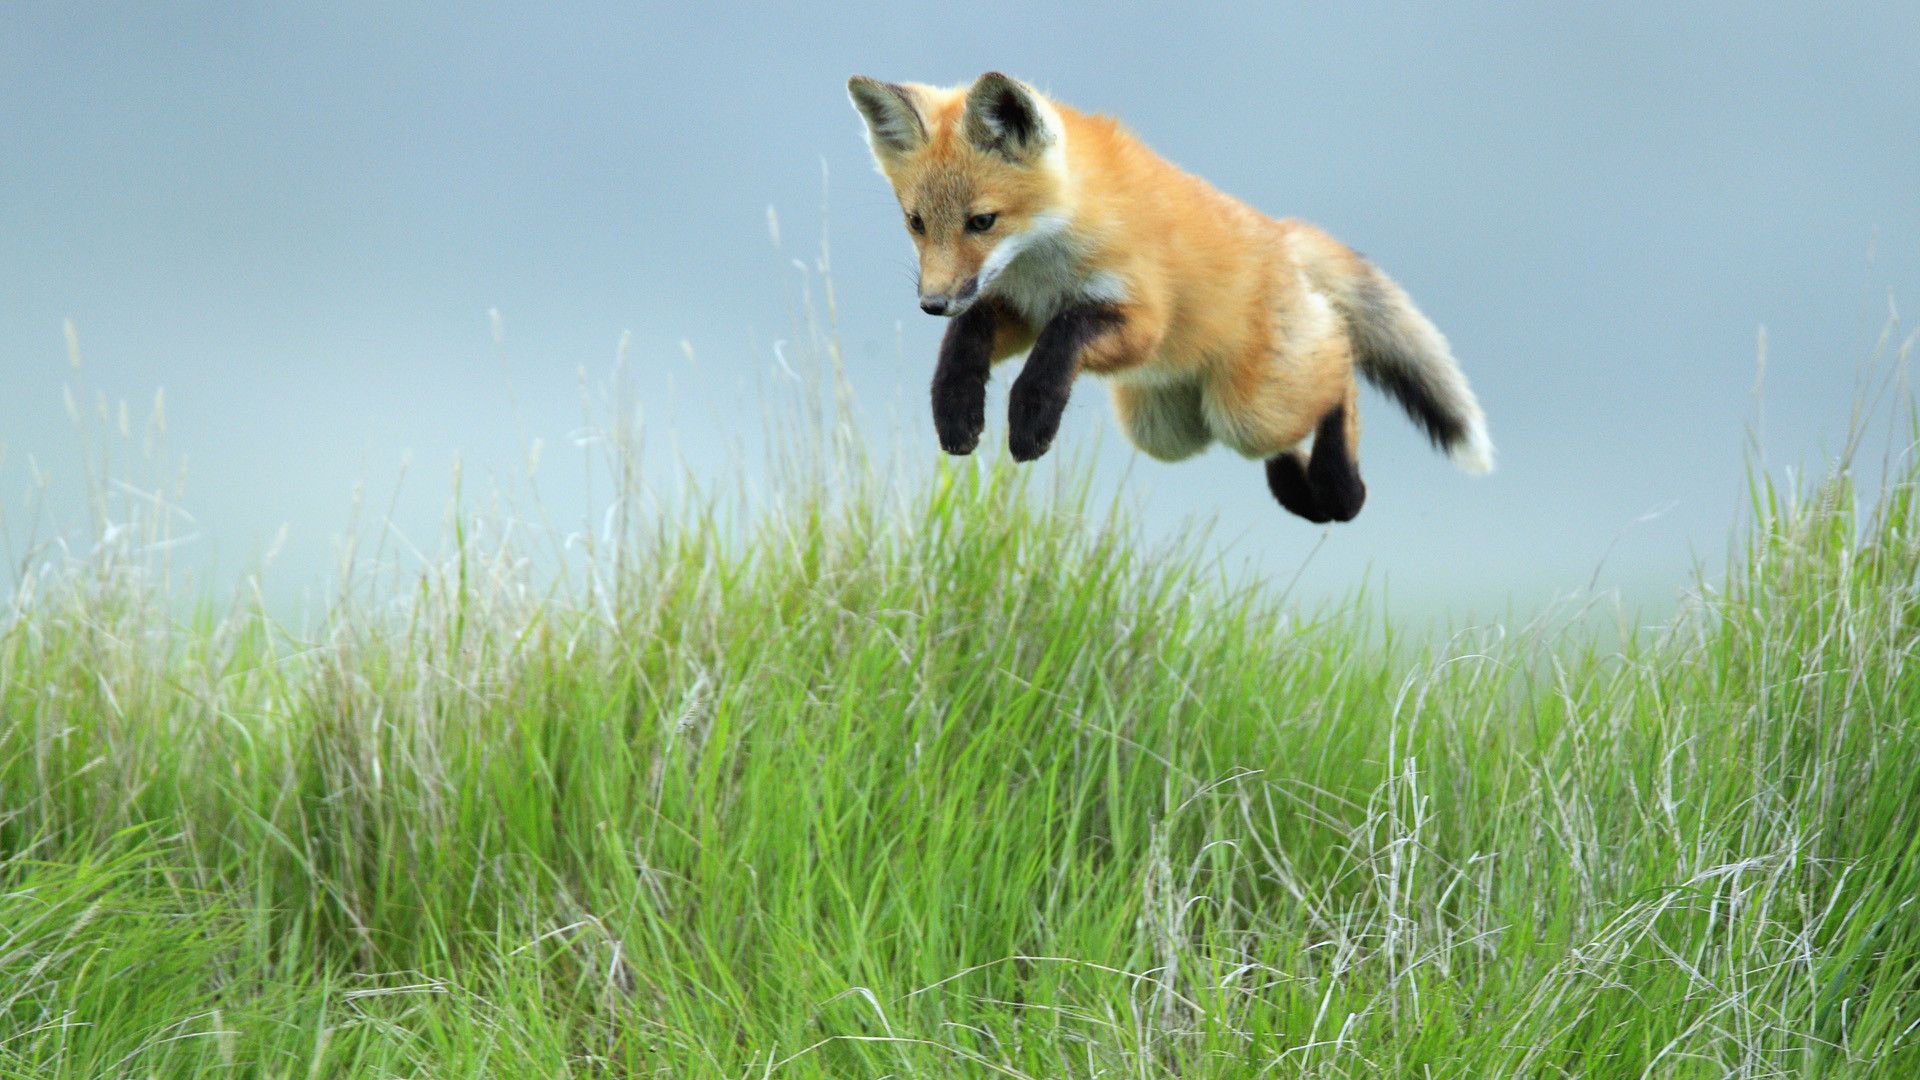 1920x1080 Foxes Leaping Red Fox Pup, Saskatchewan Animals Wallpapers and photos